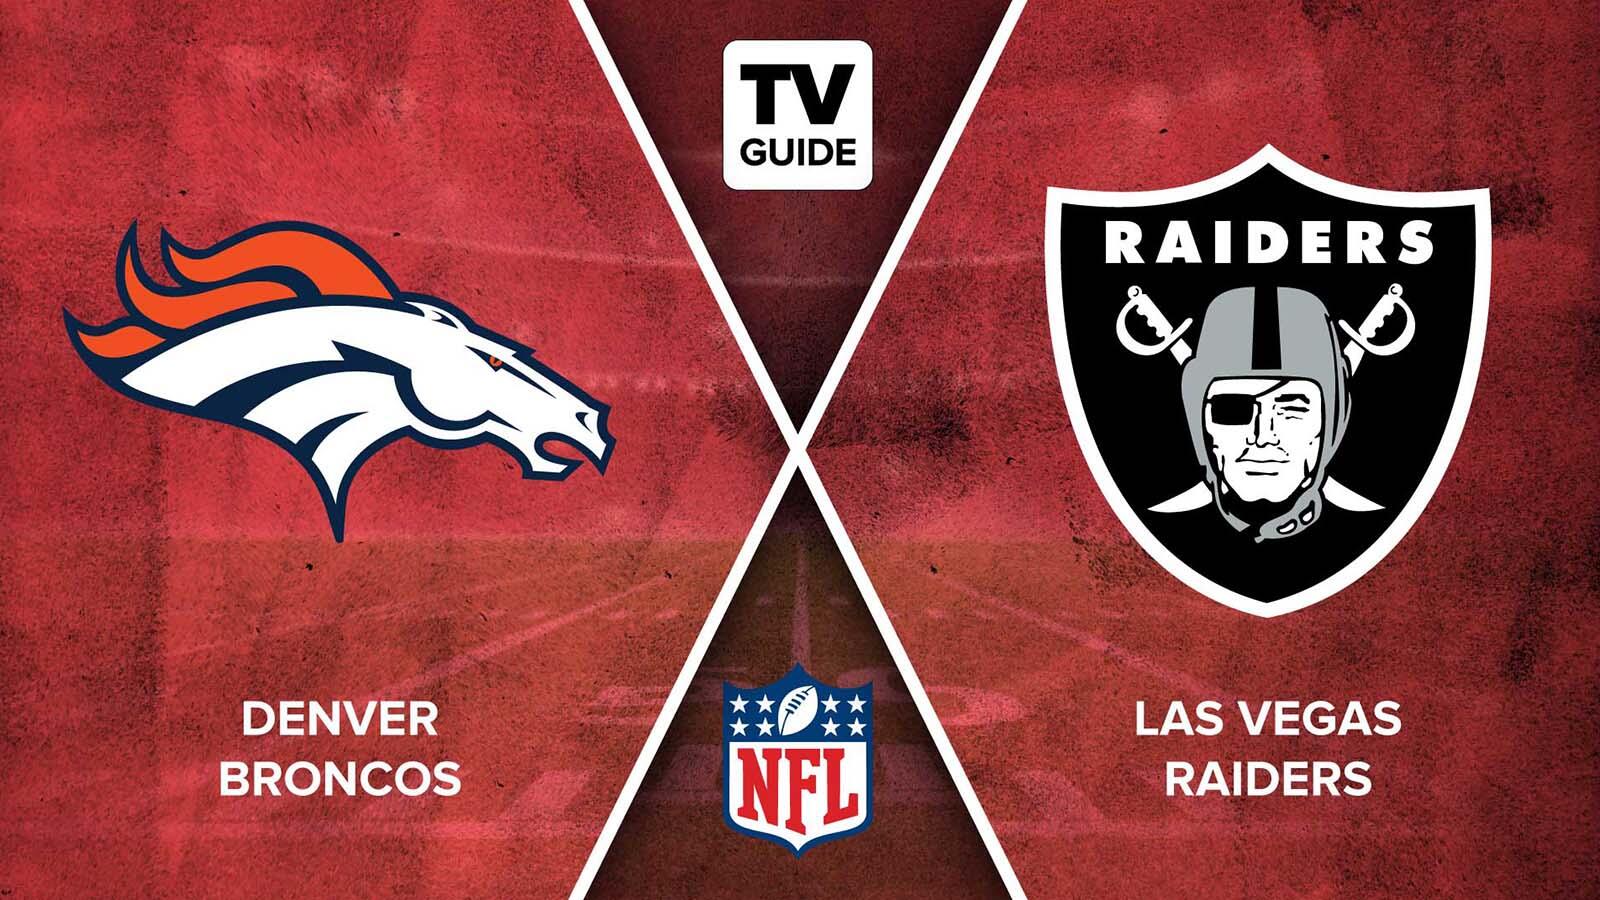 How to Watch Raiders Games Without Cable